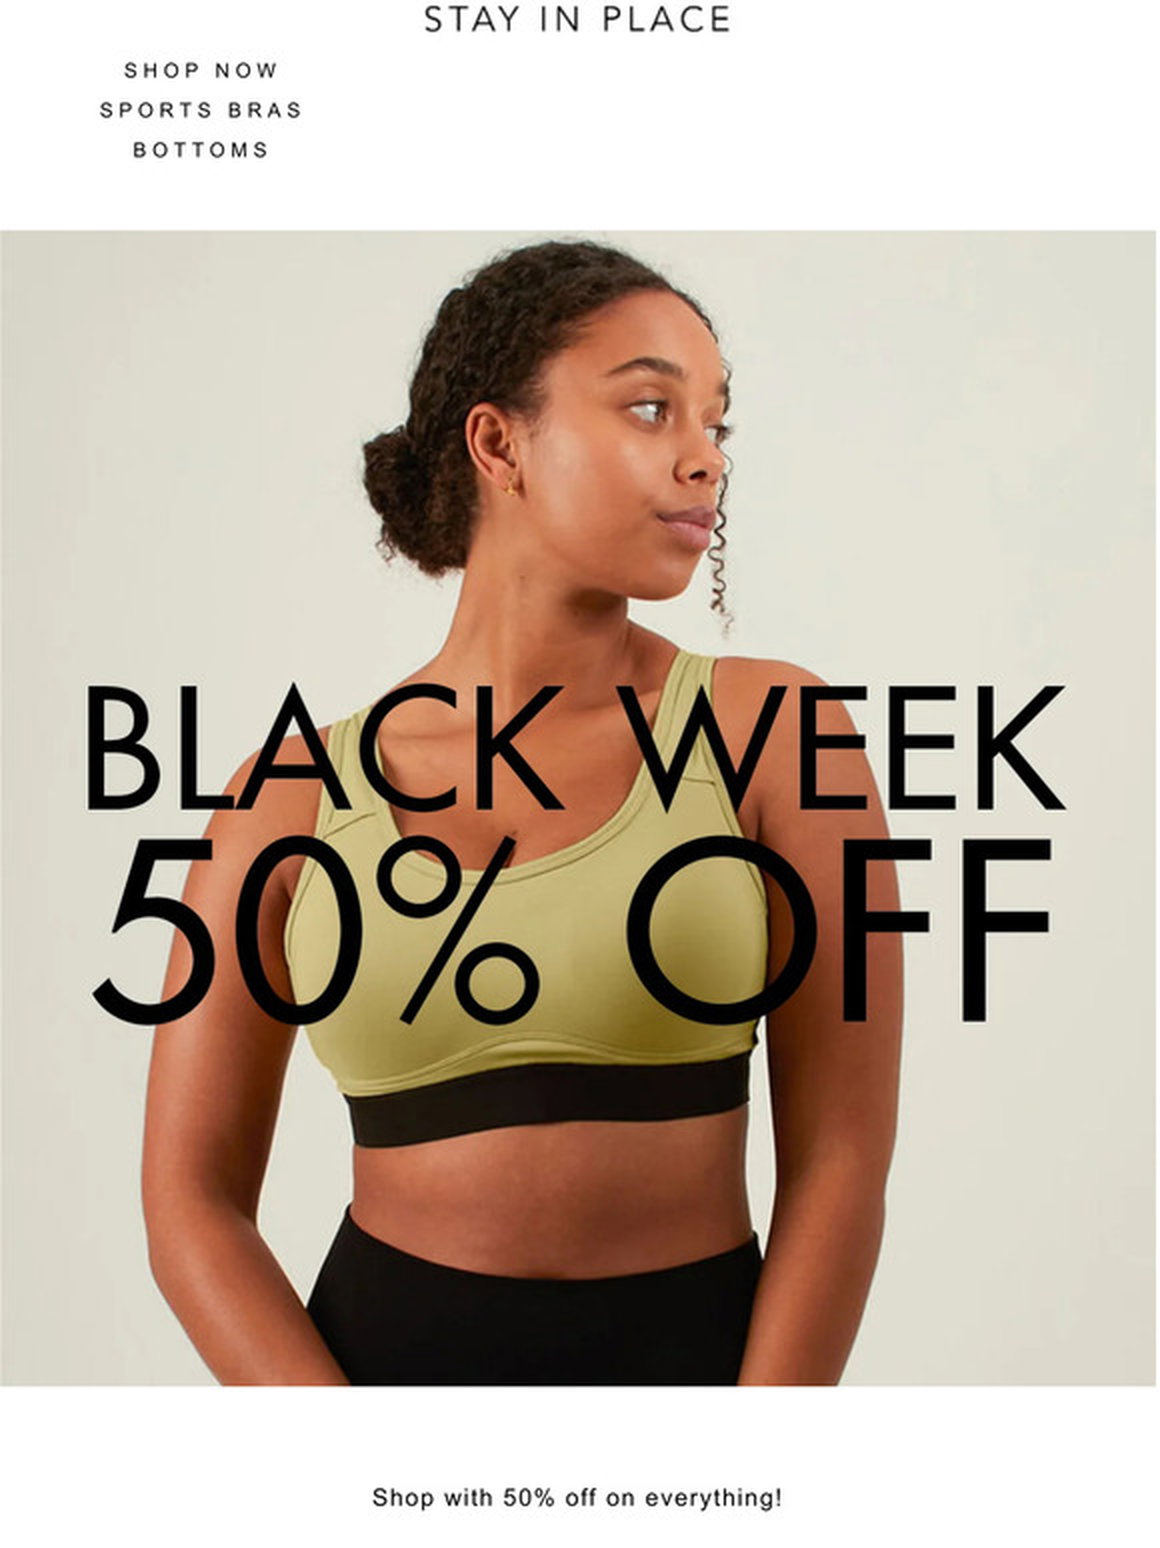 Stay In Place DK: New year, new sports bra